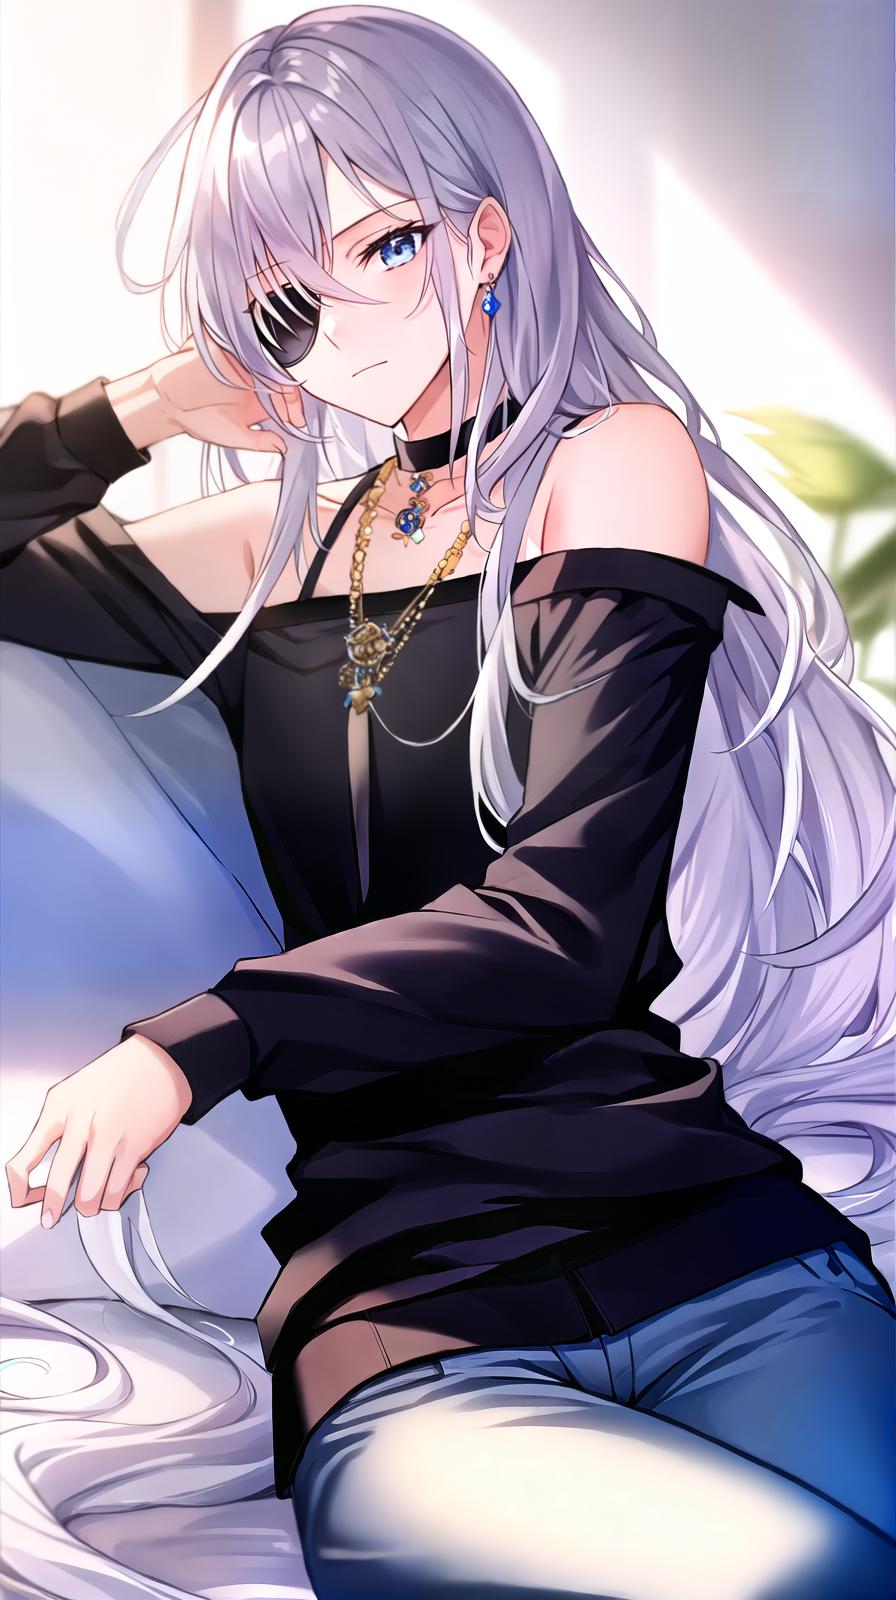  ((((masterpiece)))), best quality, very_high_resolution, ultra-detailed, in-frame, handsome, soft, young, silver hair, blue eyes, shoulder-length hair, half-up hairstyle, T-shirt, slim pants, blue (for the top), black (for the bottom), eye patch on the right side, prince-like, beautiful eyelashes